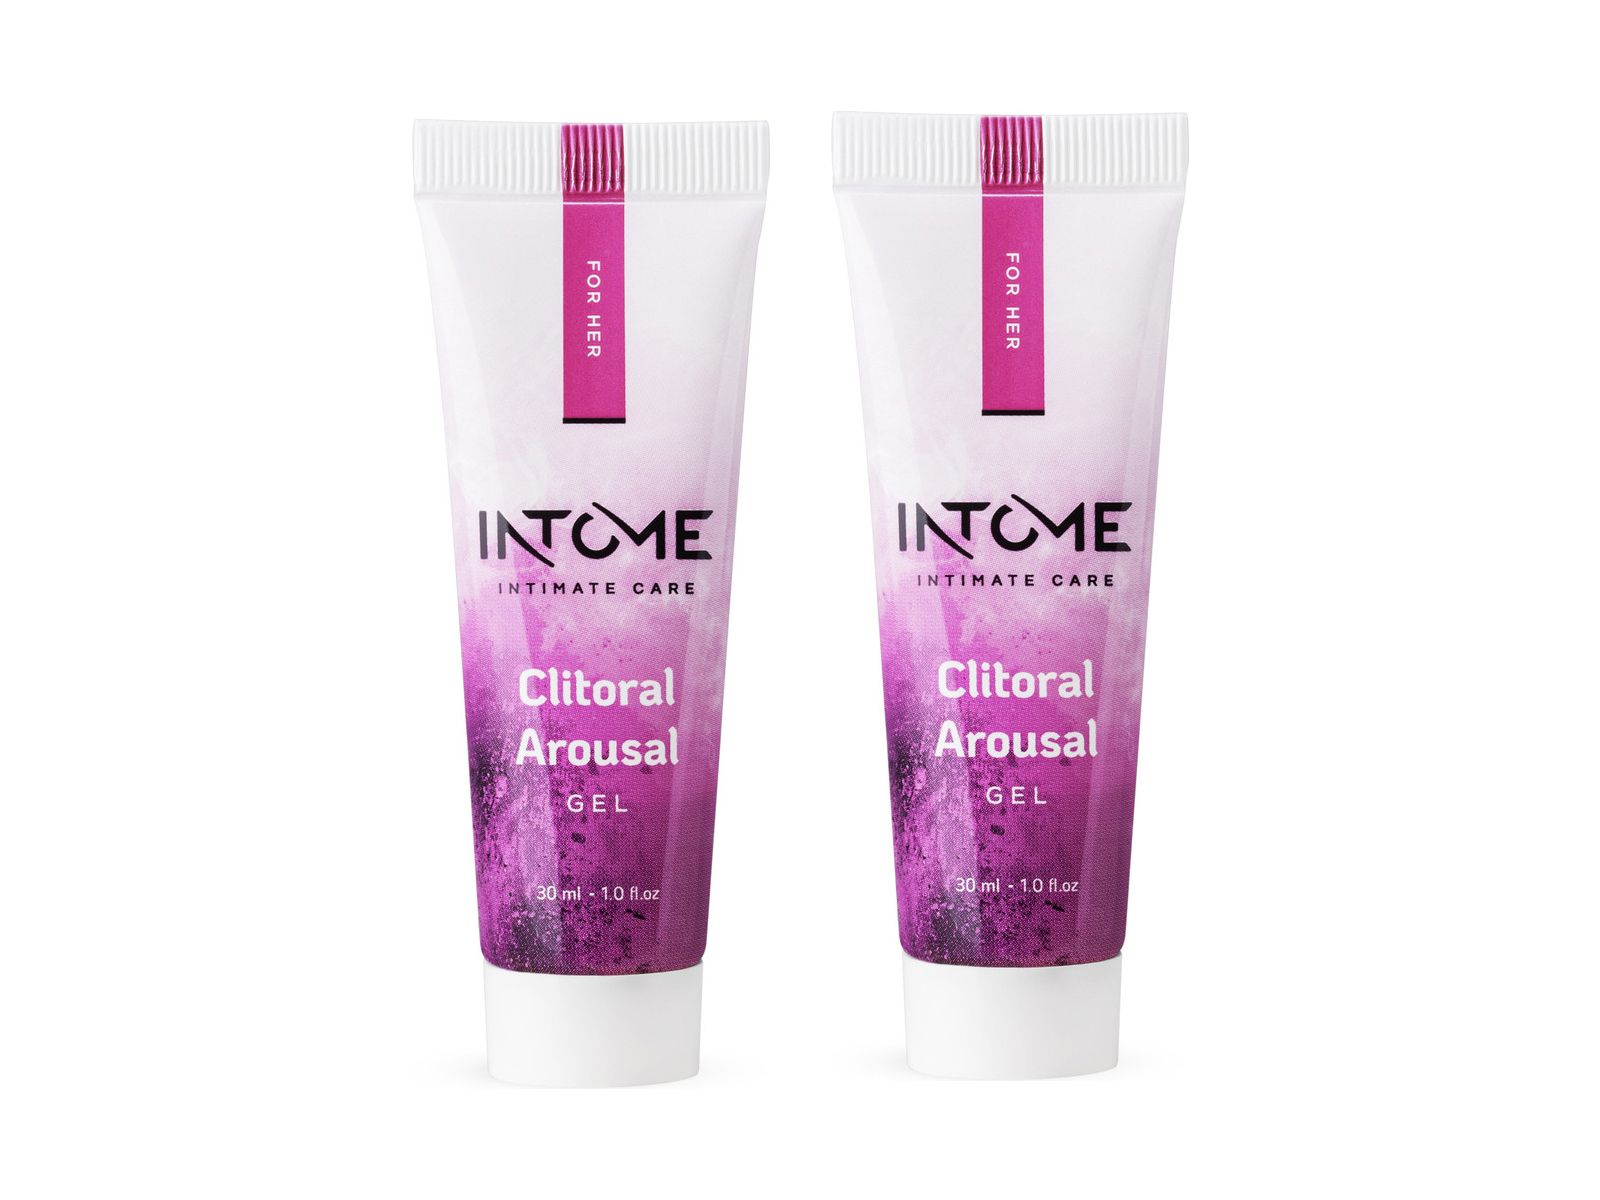 2x-zel-intome-clitoral-arousal-30-ml